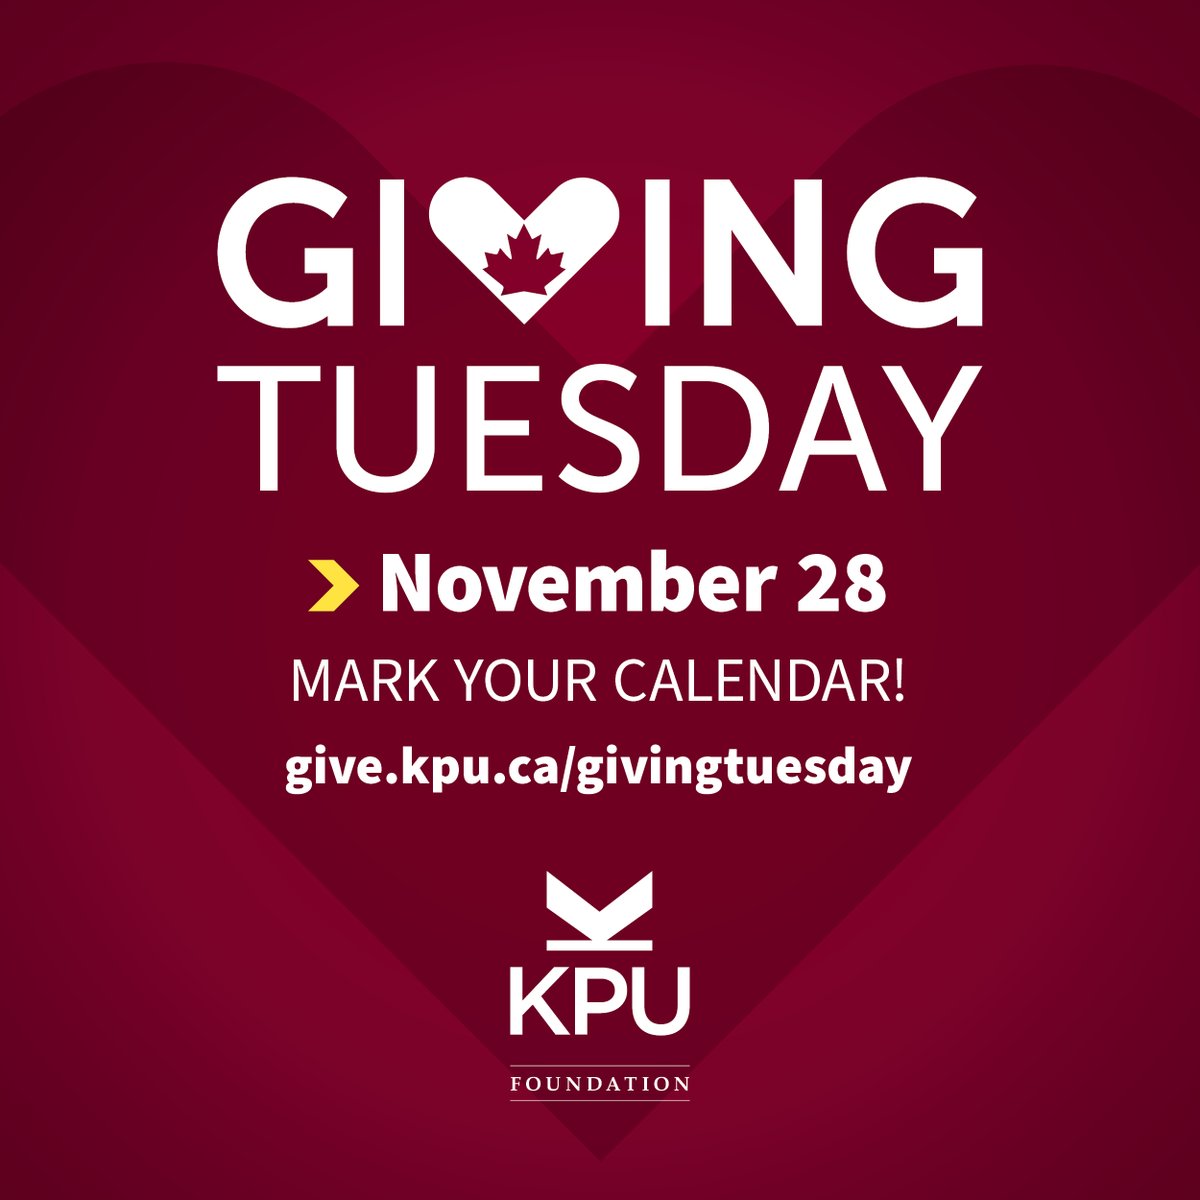 The KPU Foundation is running its 4th annual Giving Tuesday fundraiser. We are uniting our community to bridge the gap of demonstrated financial need with a focus on food security by funding the Emergency Bursary, & Area of Greatest Need. Give today! give.kpu.ca/donate